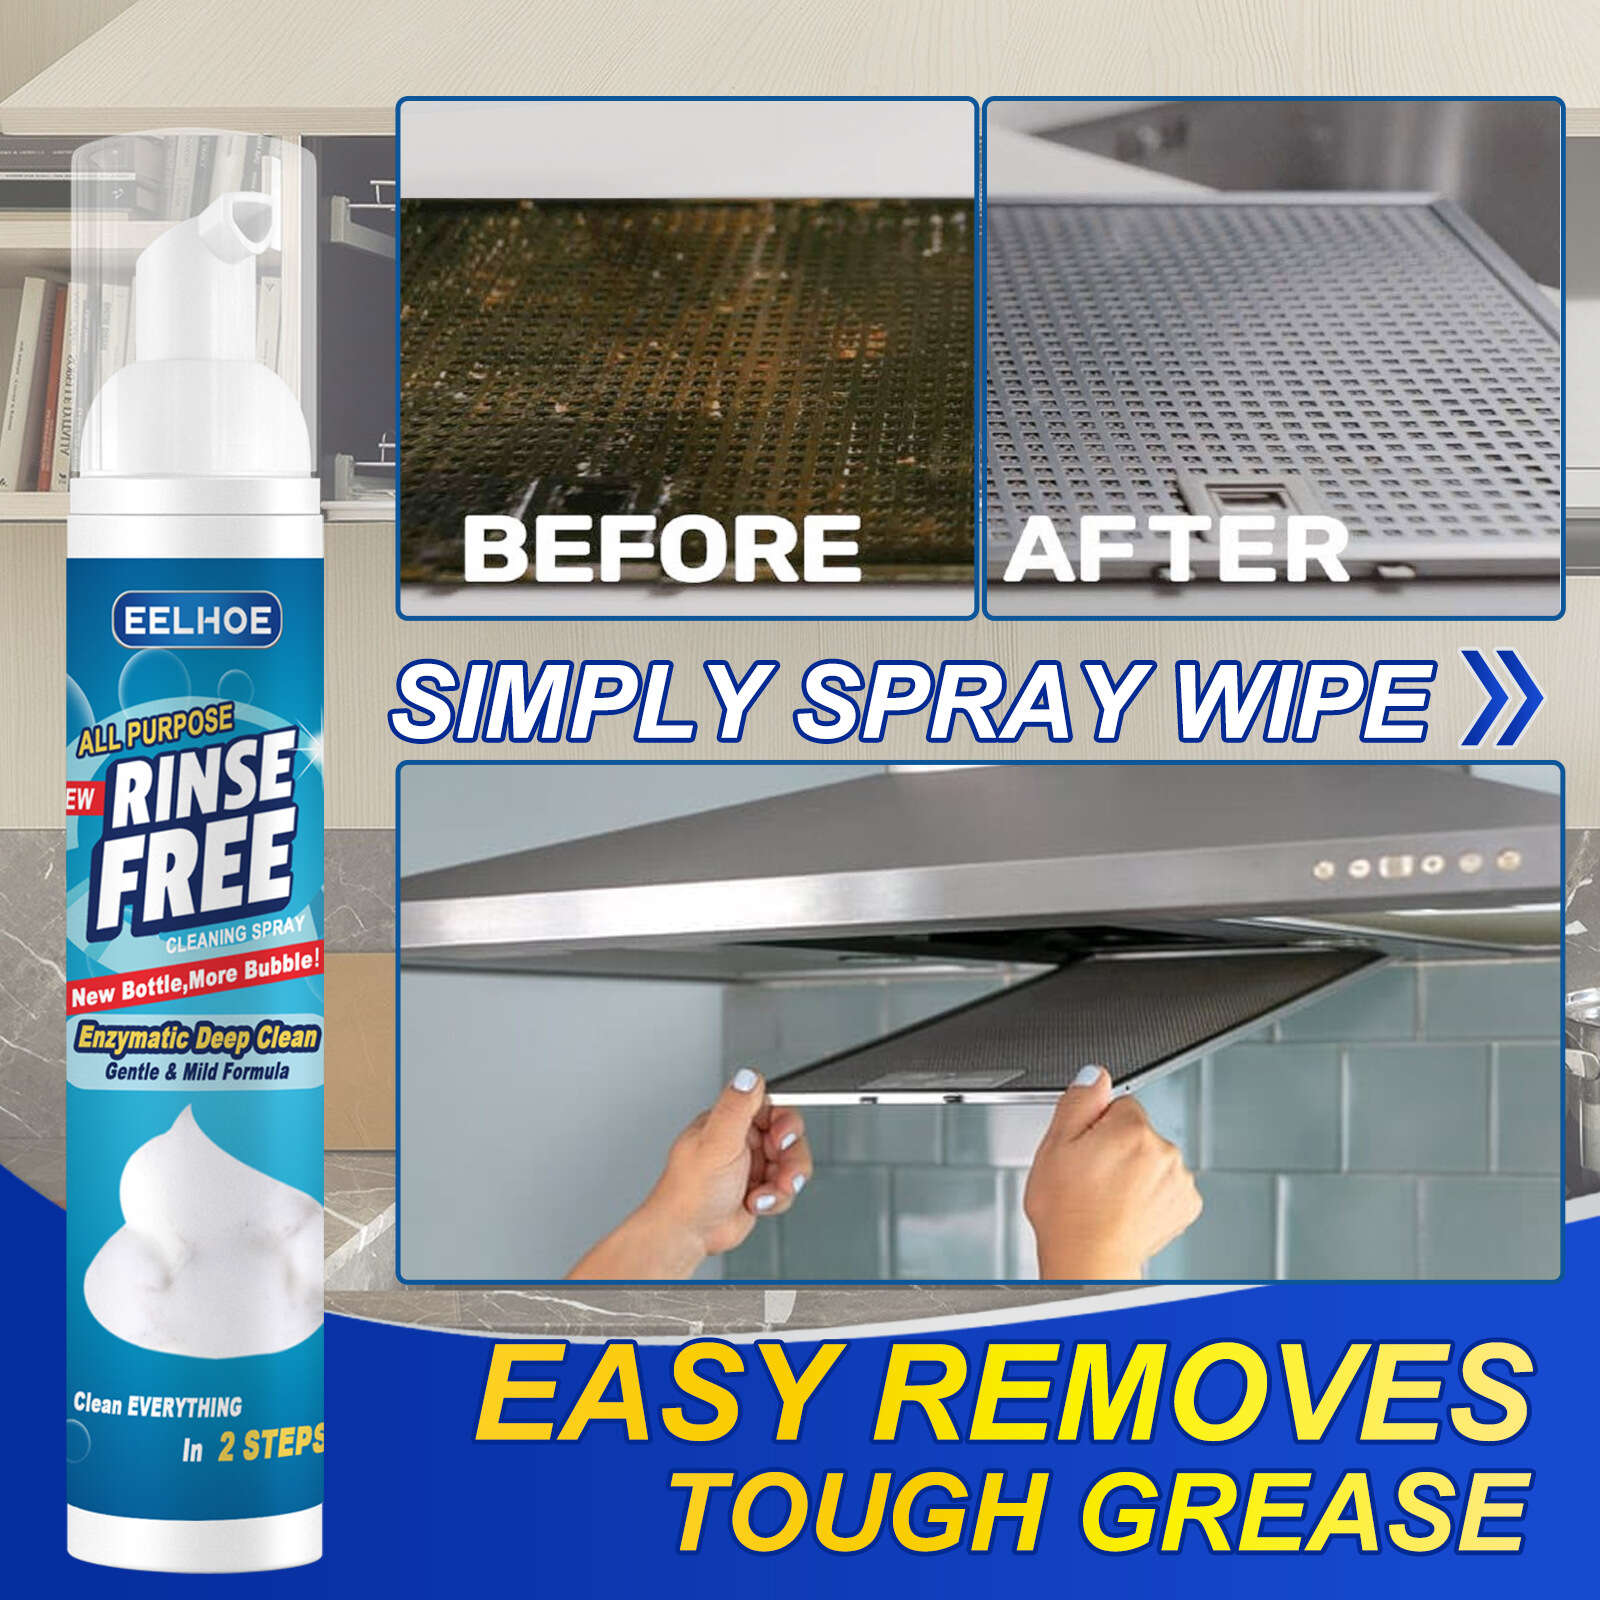 All Purpose Bubble Cleaner - Bubble Cleaner